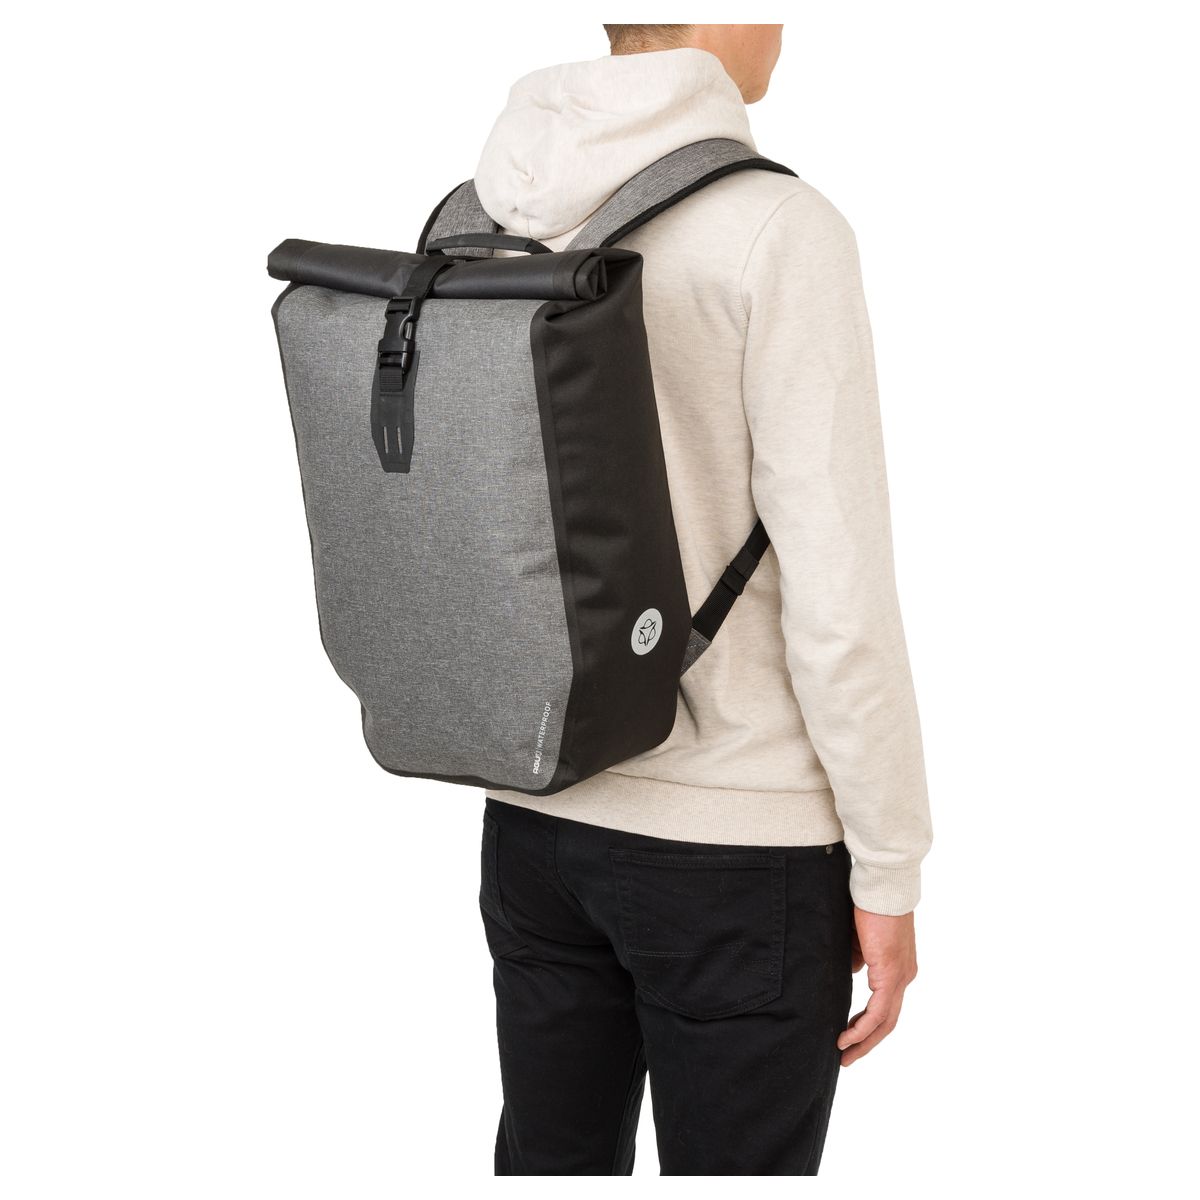 Backpack Shelter Large fit example